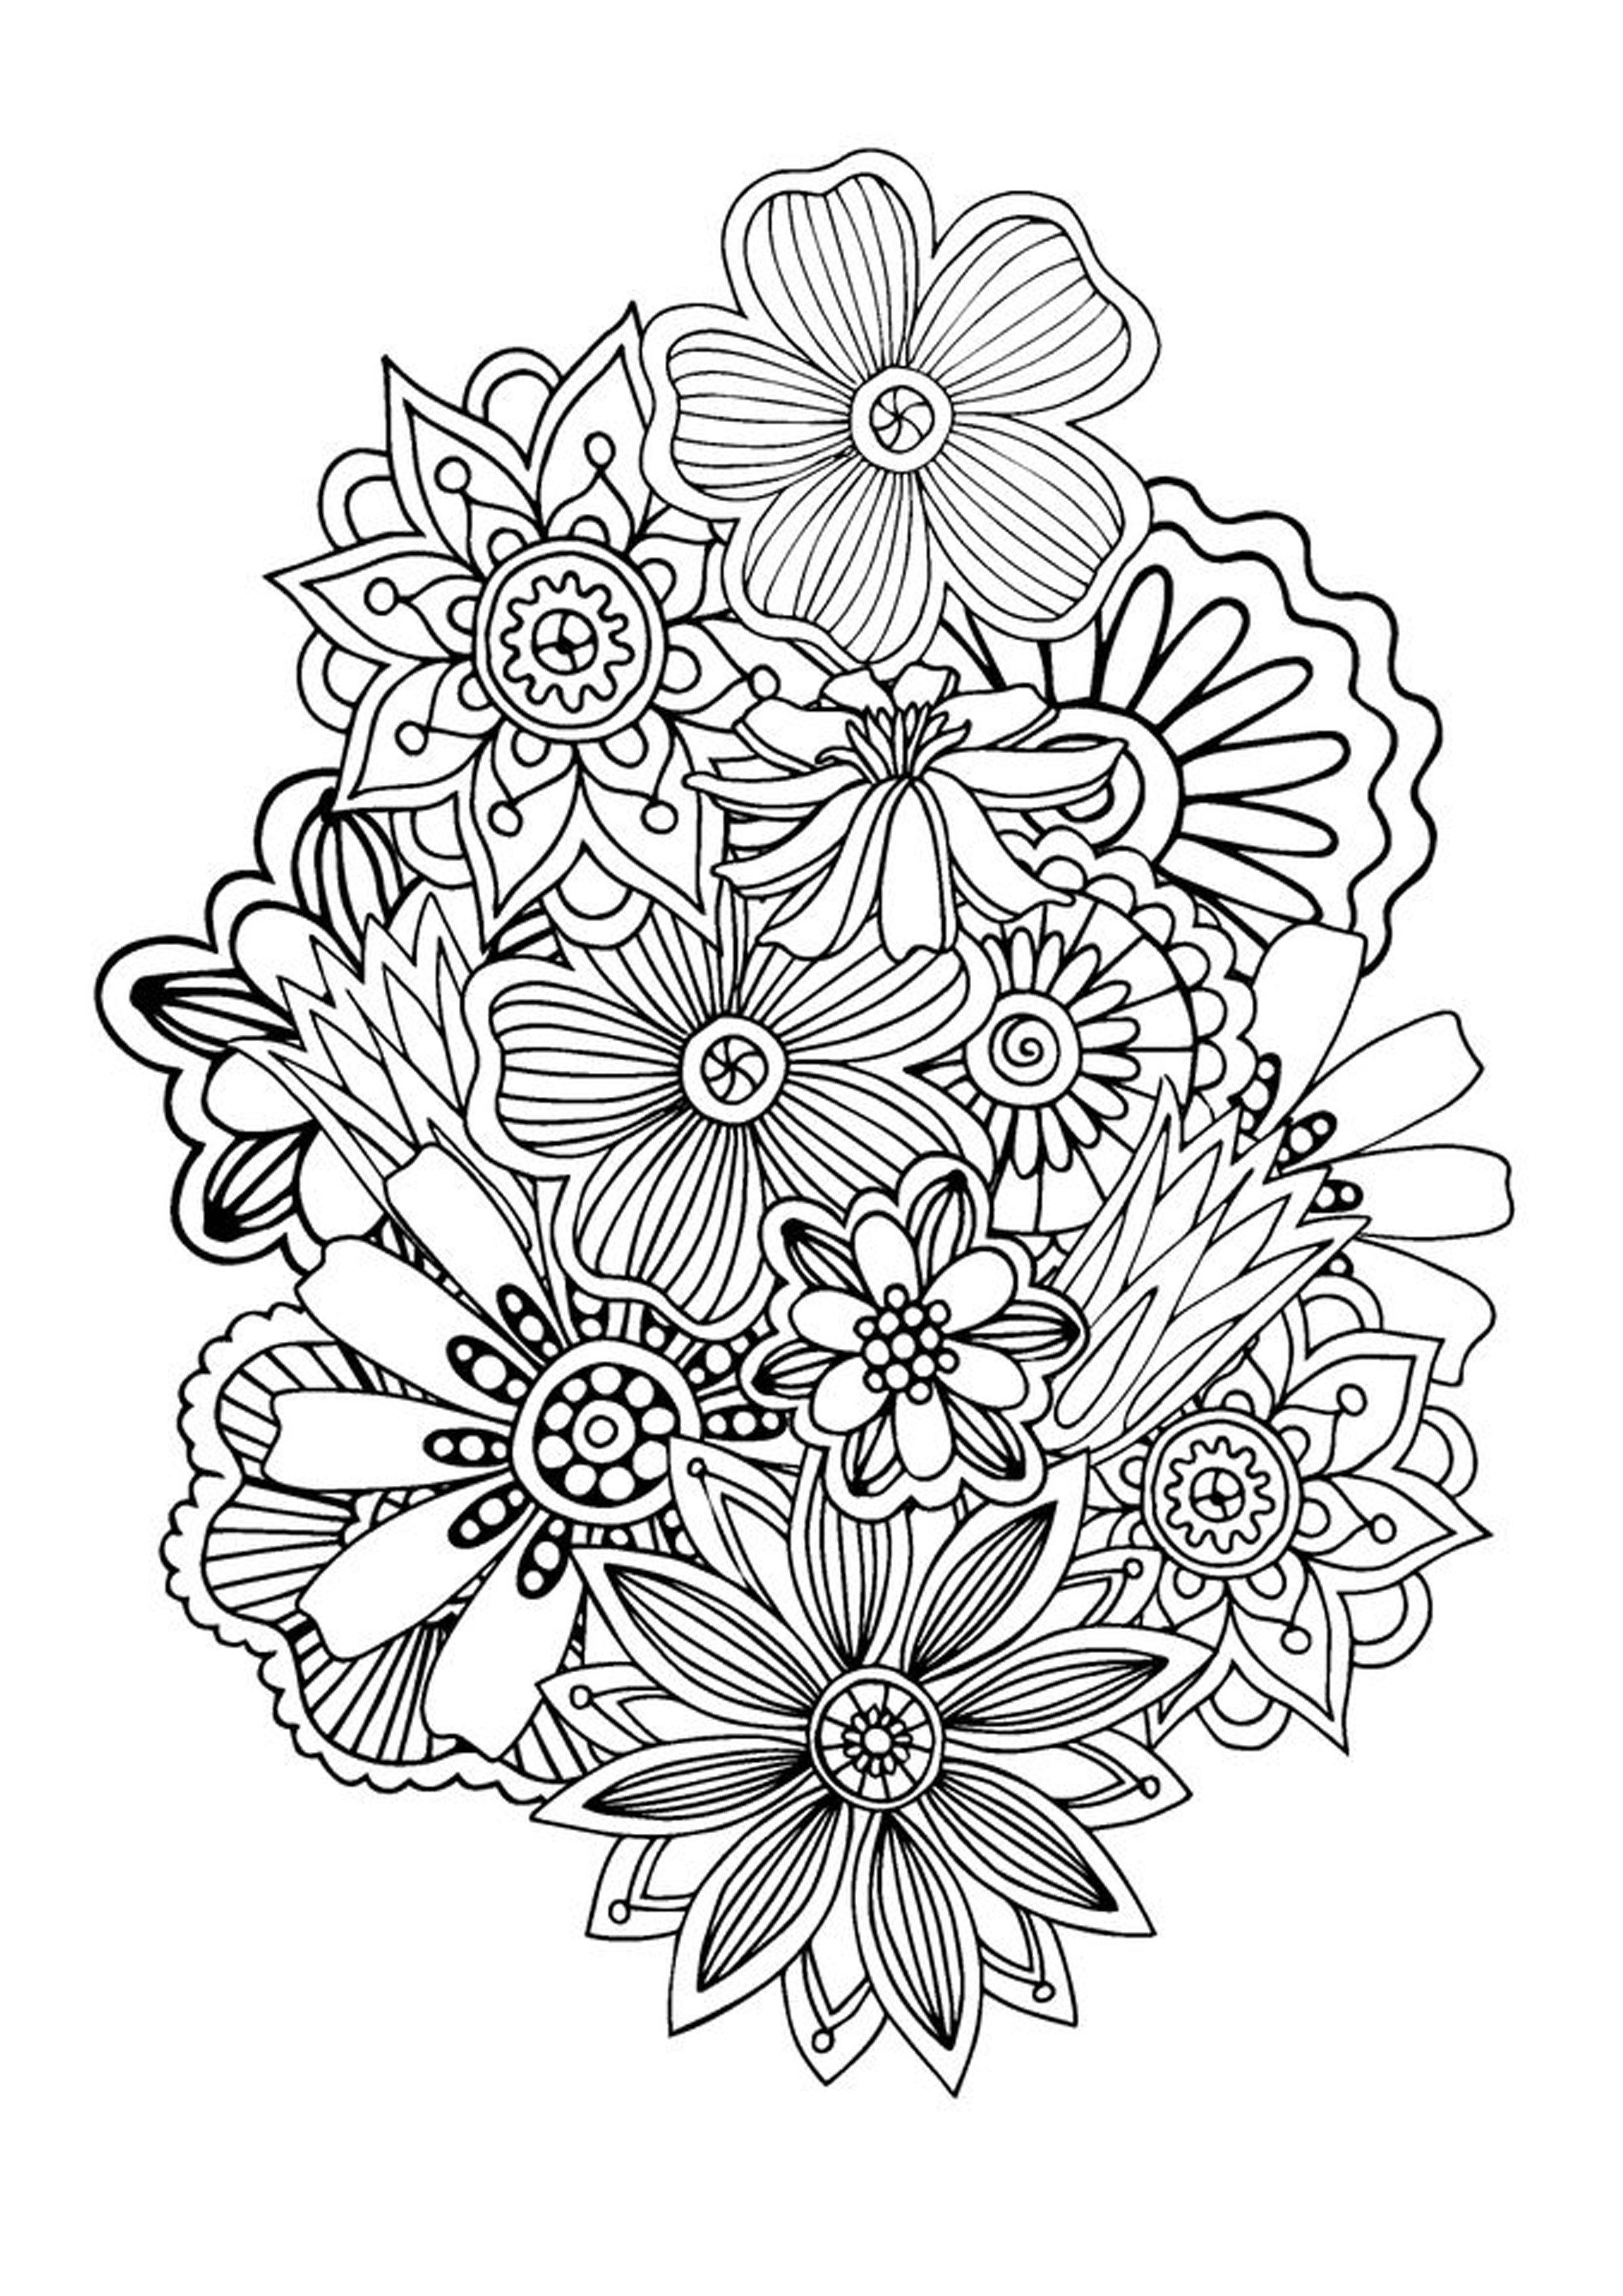 Zen antistress abstract pattern inspired - Anti stress Adult Coloring